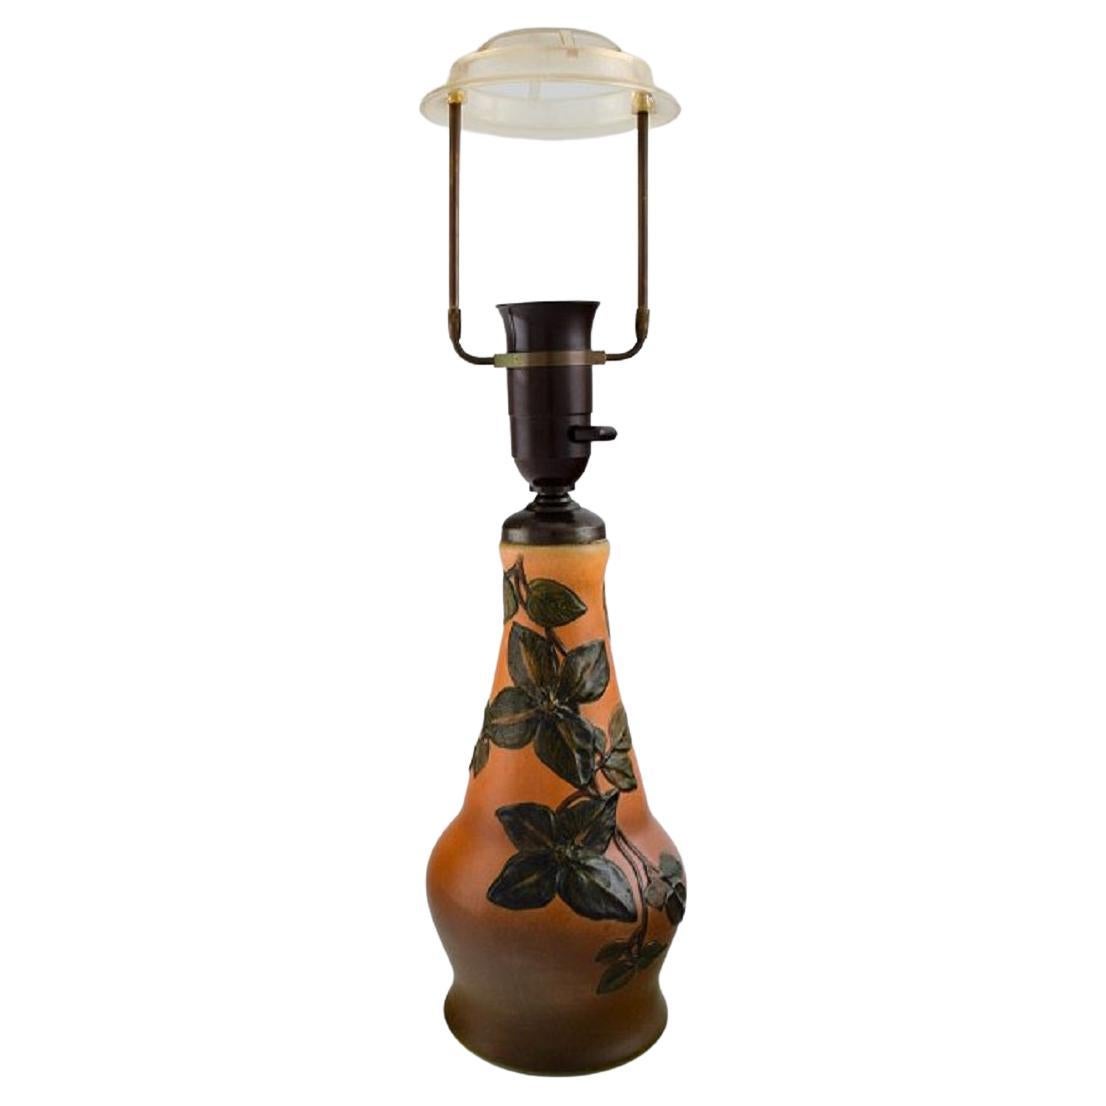 Ipsen's, Denmark, Table Lamp in Glazed Ceramics with Hand-Painted Foliage